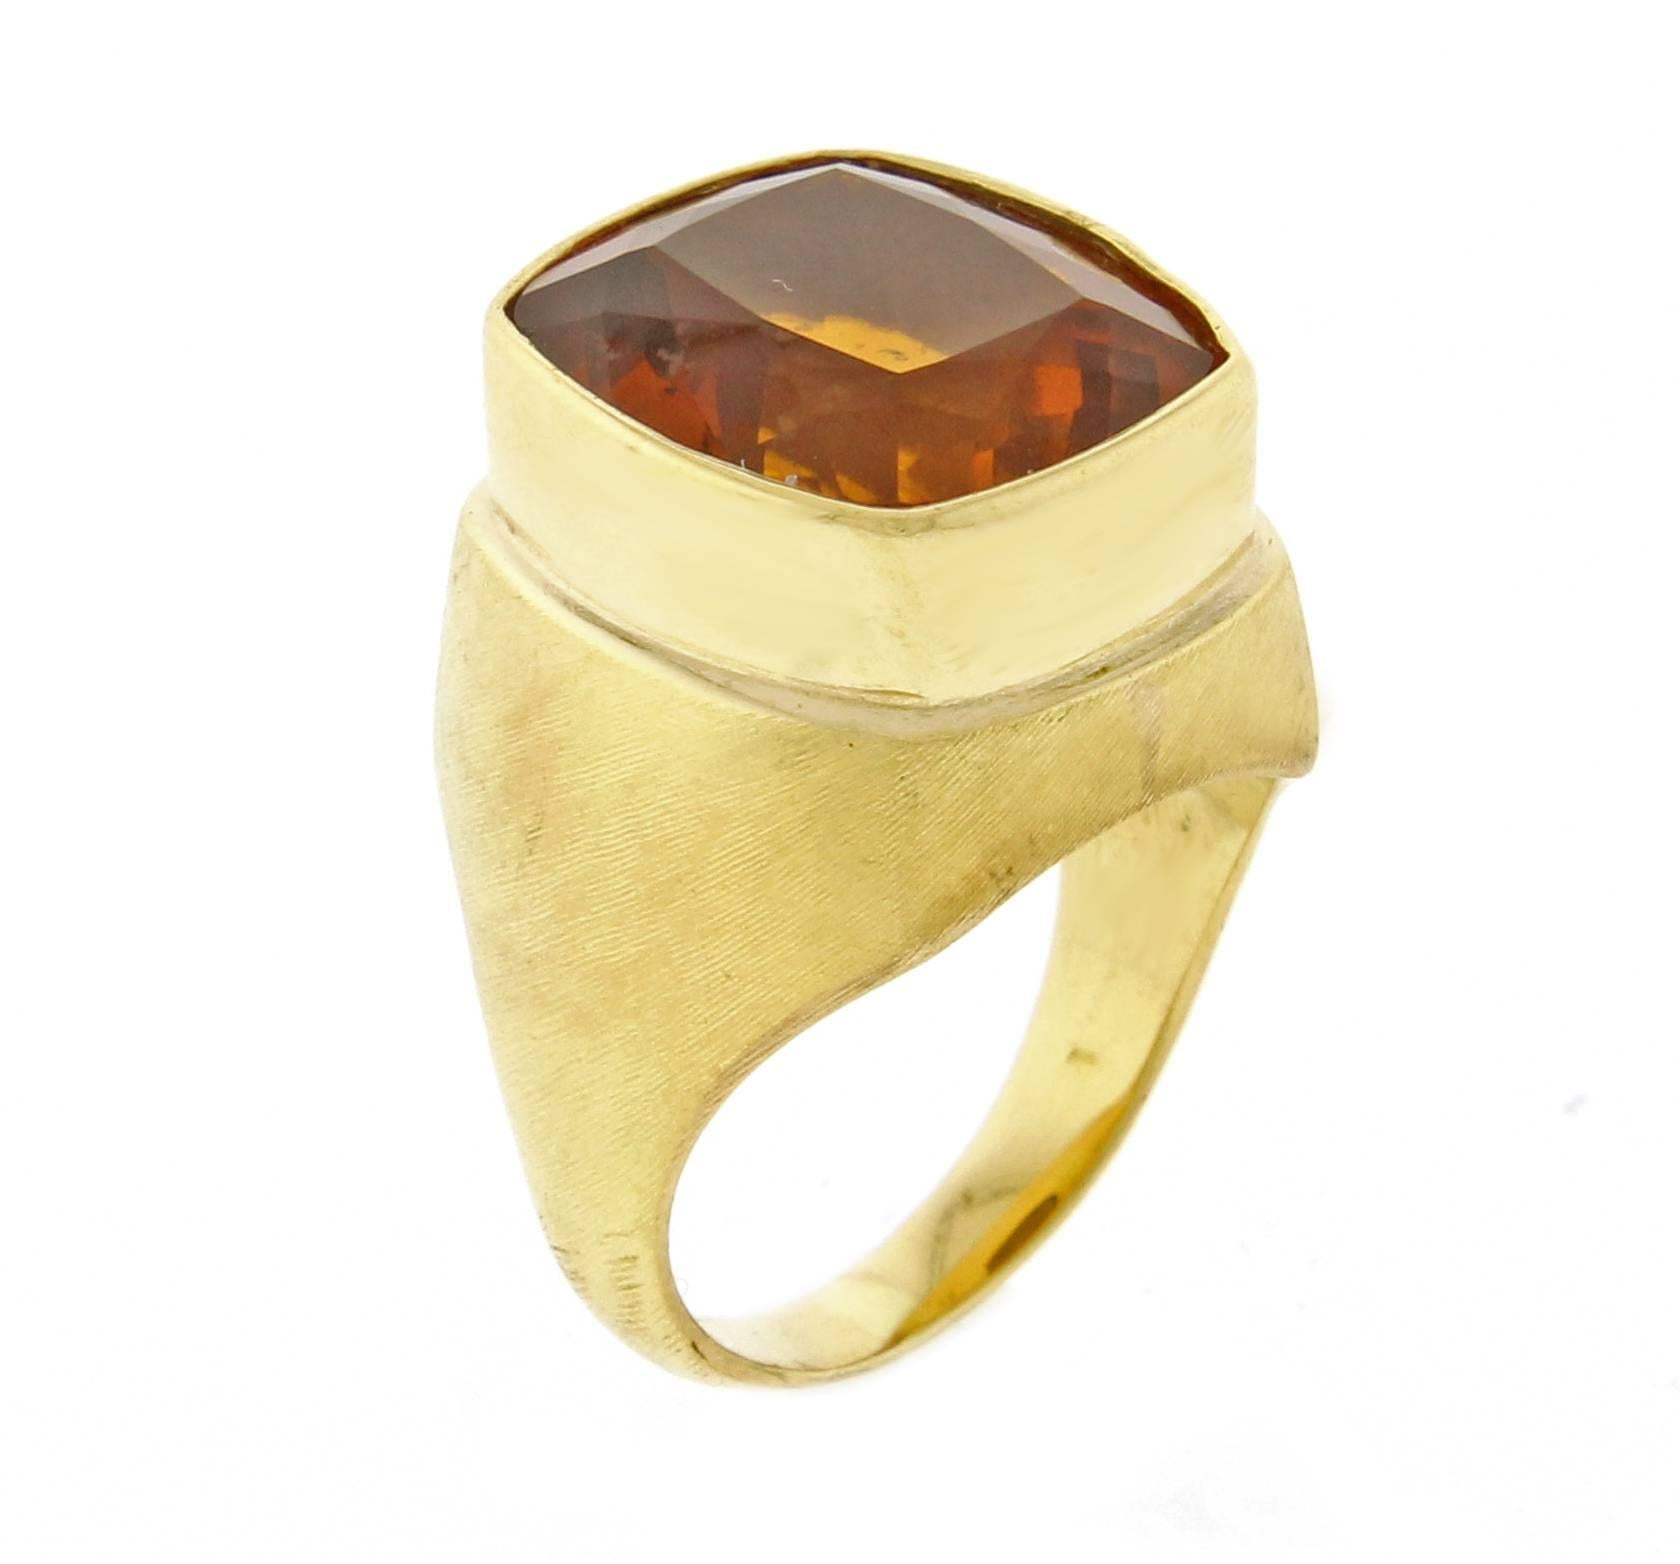 rushed 18 karat gold citrine ring by world renowned Brazilian jeweler Haroldo Burle Marx (1911-1991). The ring features a bezel set 15*12.5mm cushion cut citrine weighing 11 carats.  Size 6 adjustable